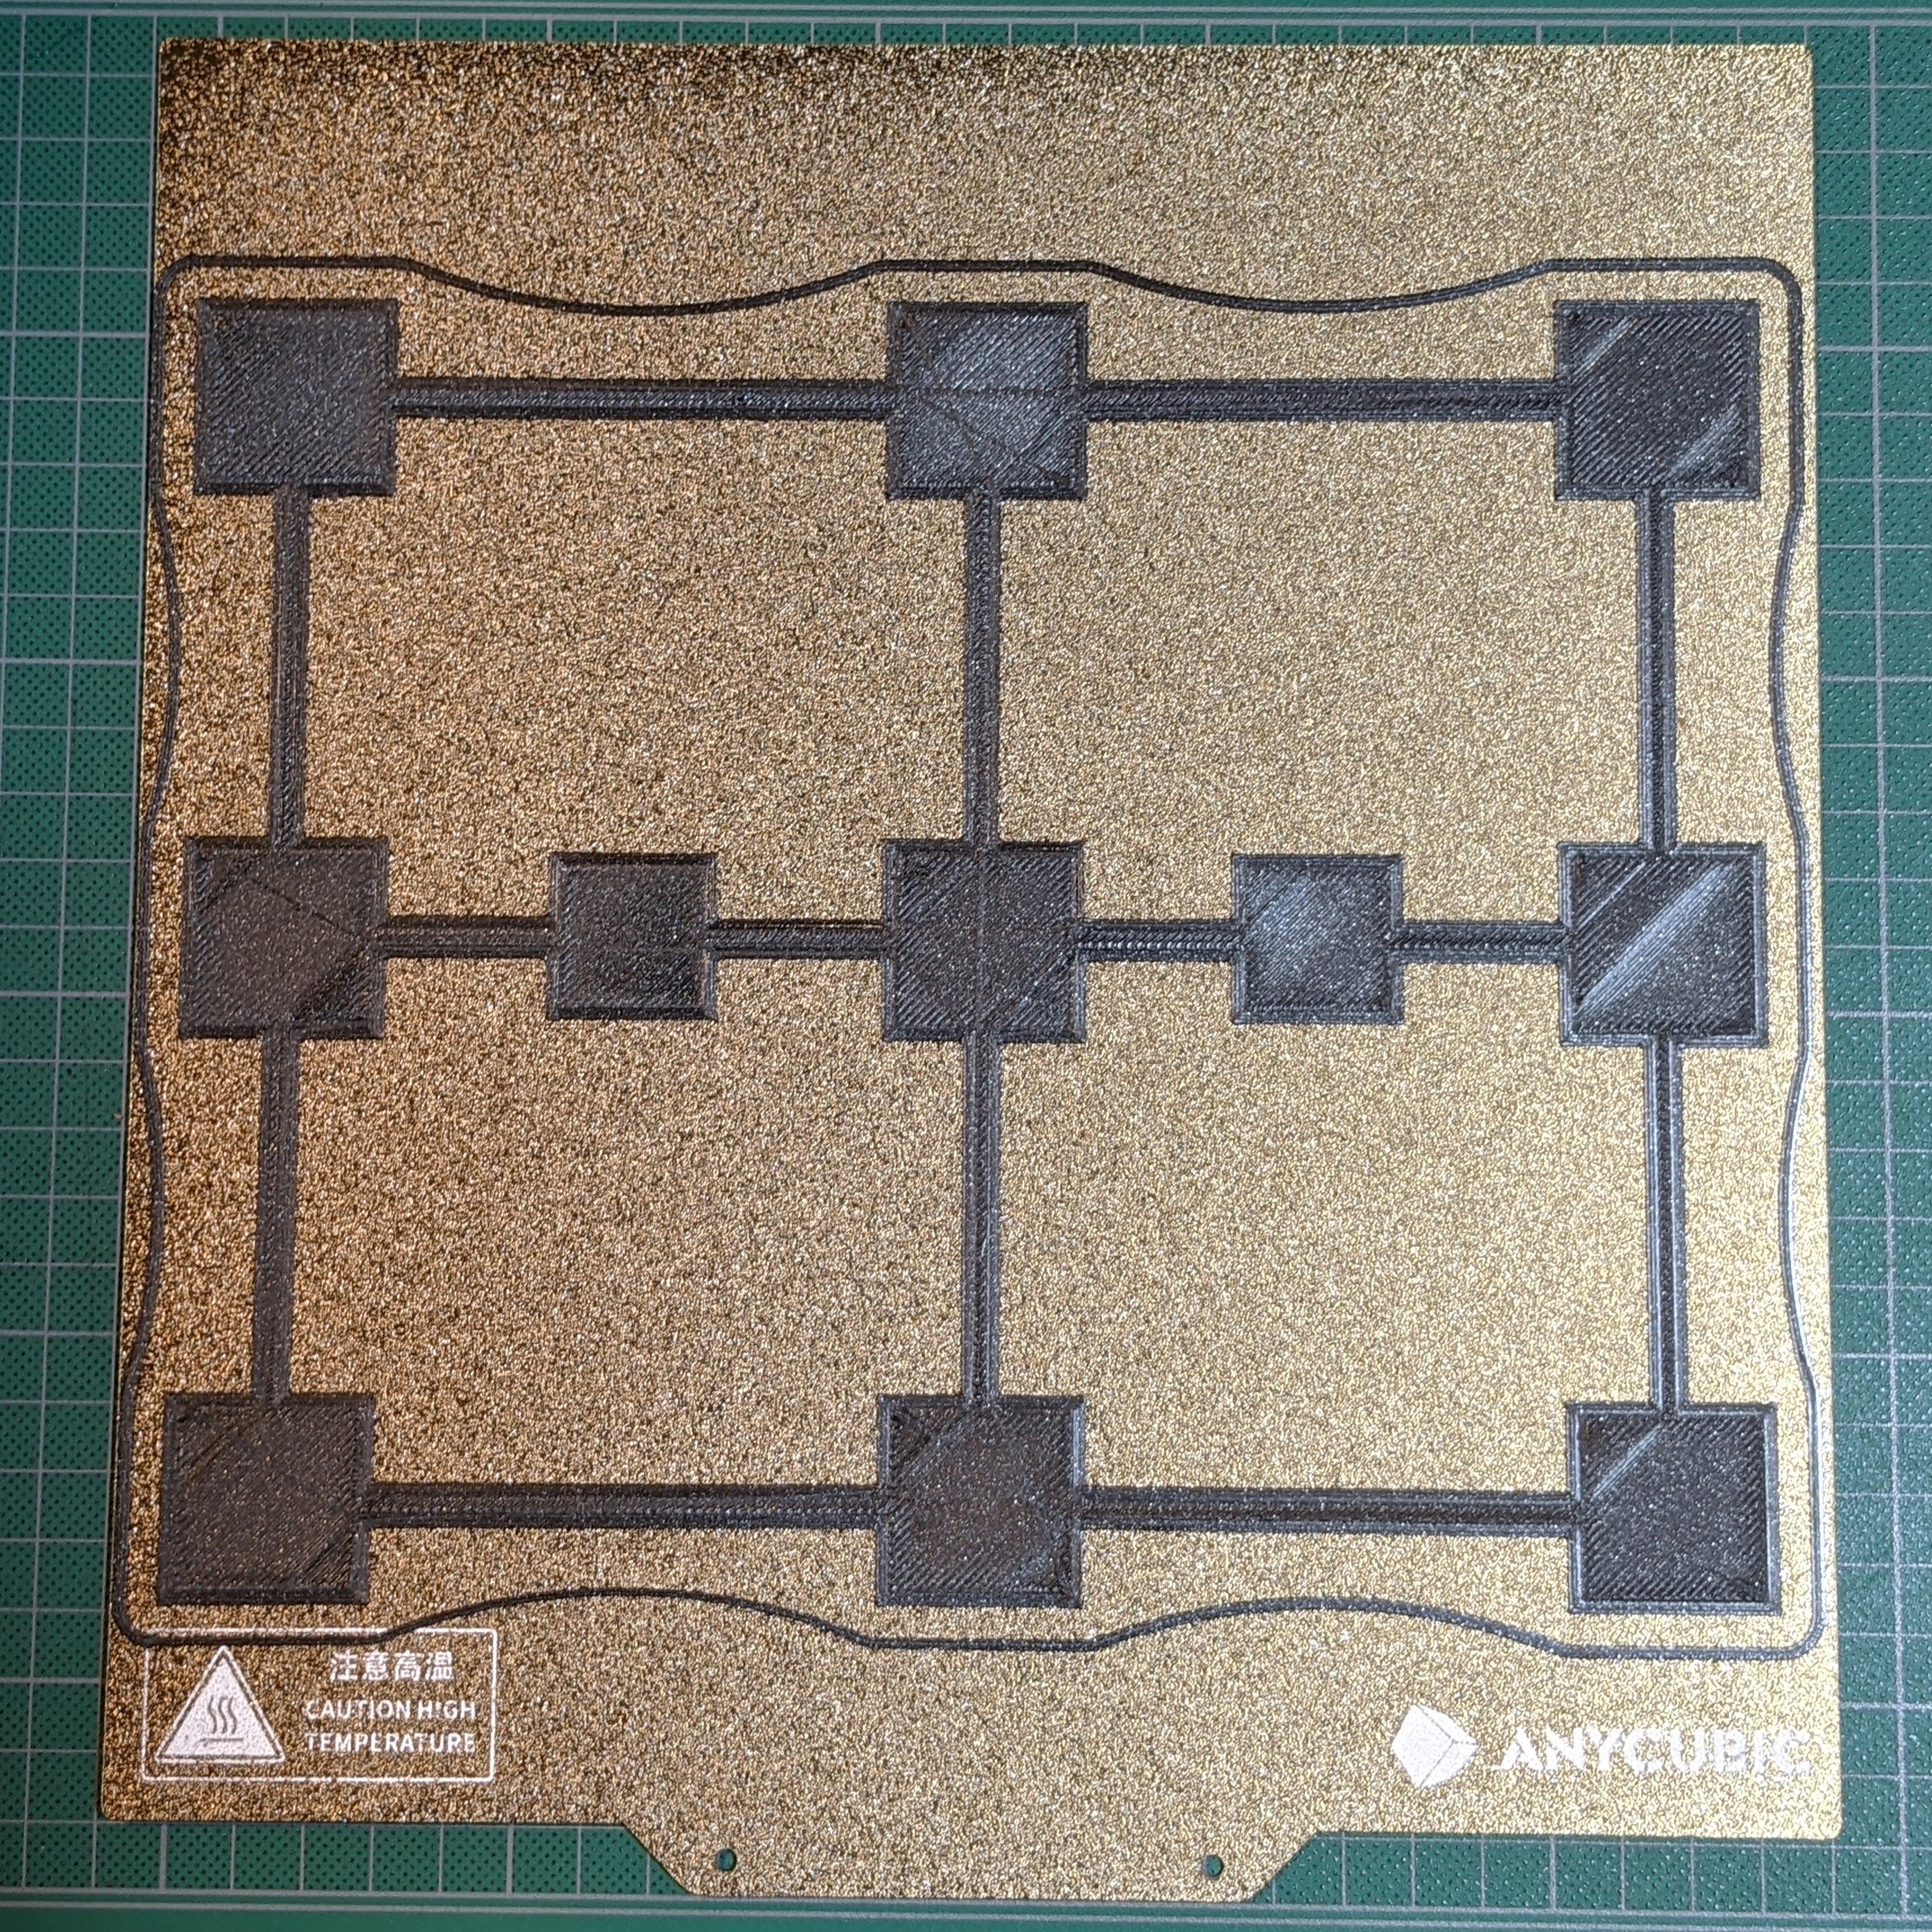 formel mobil næve 3D Printering: Is Hassle-Free Bed Leveling Finally Here? | Hackaday